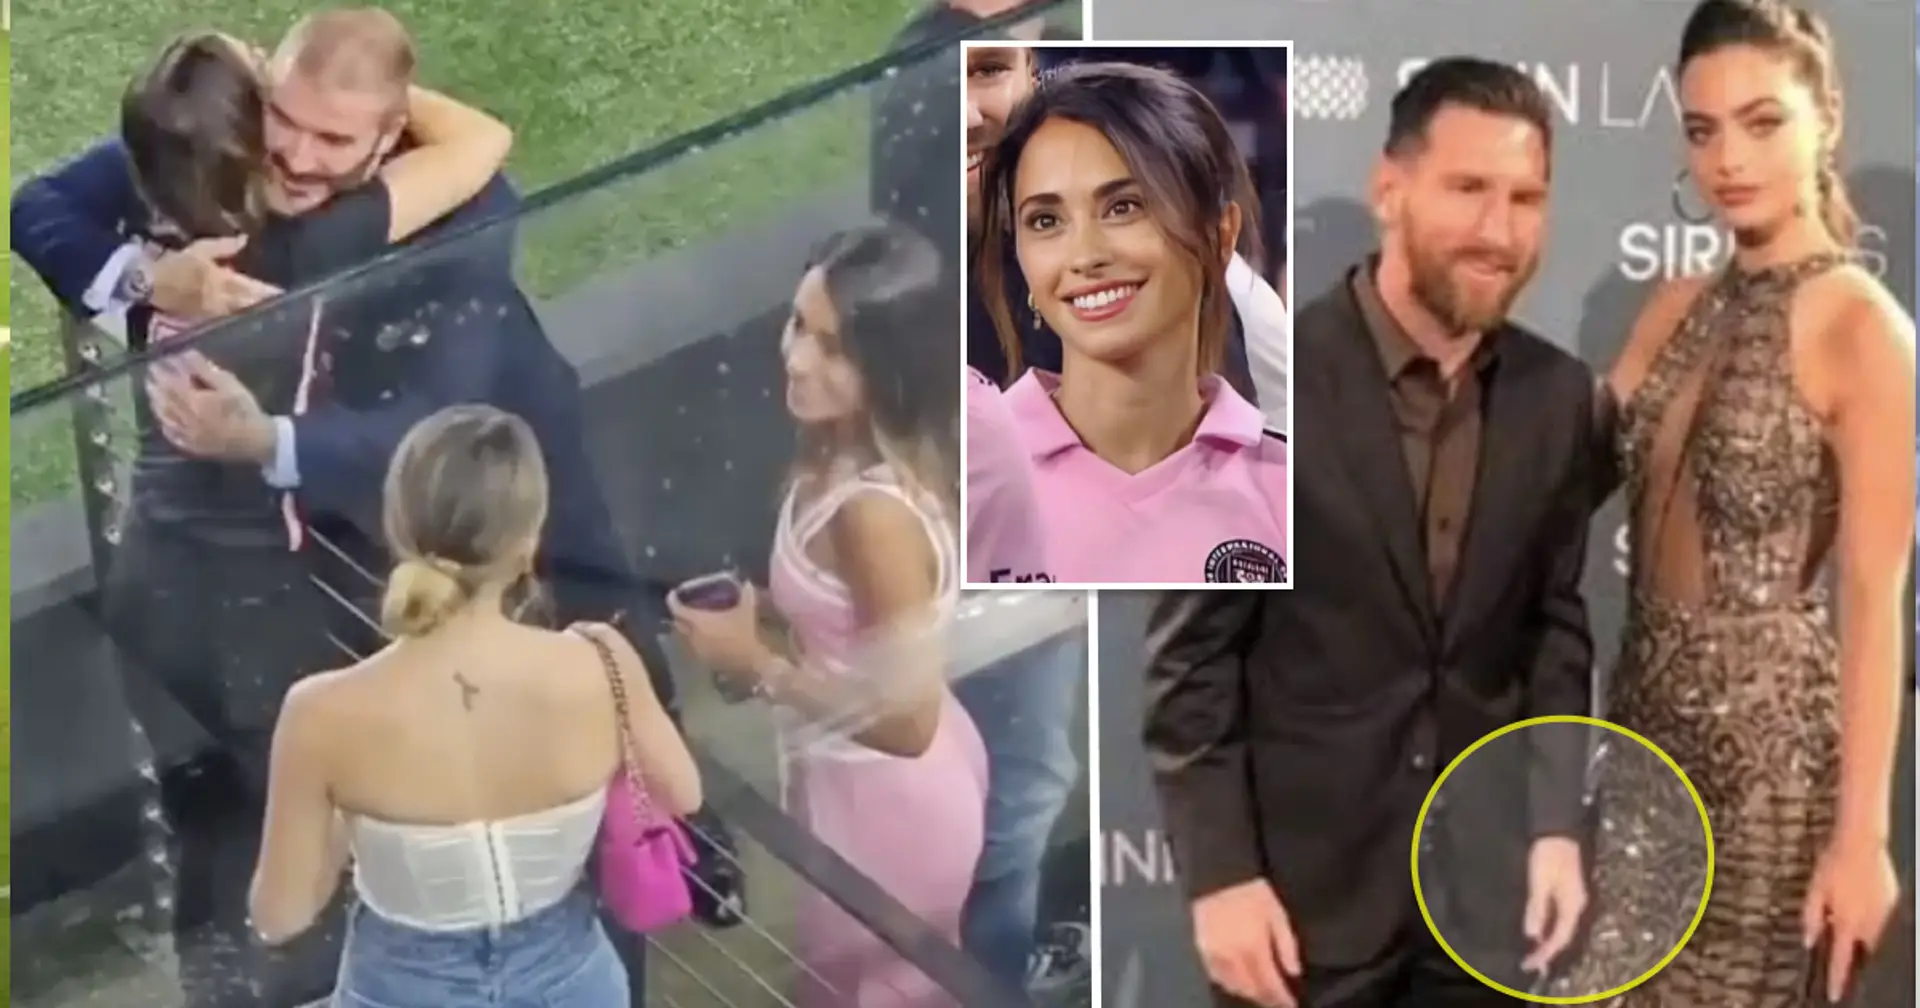 'Meanwhile Leo Messi keeps distance with models': Antonela's reaction to David Beckham caught on camera